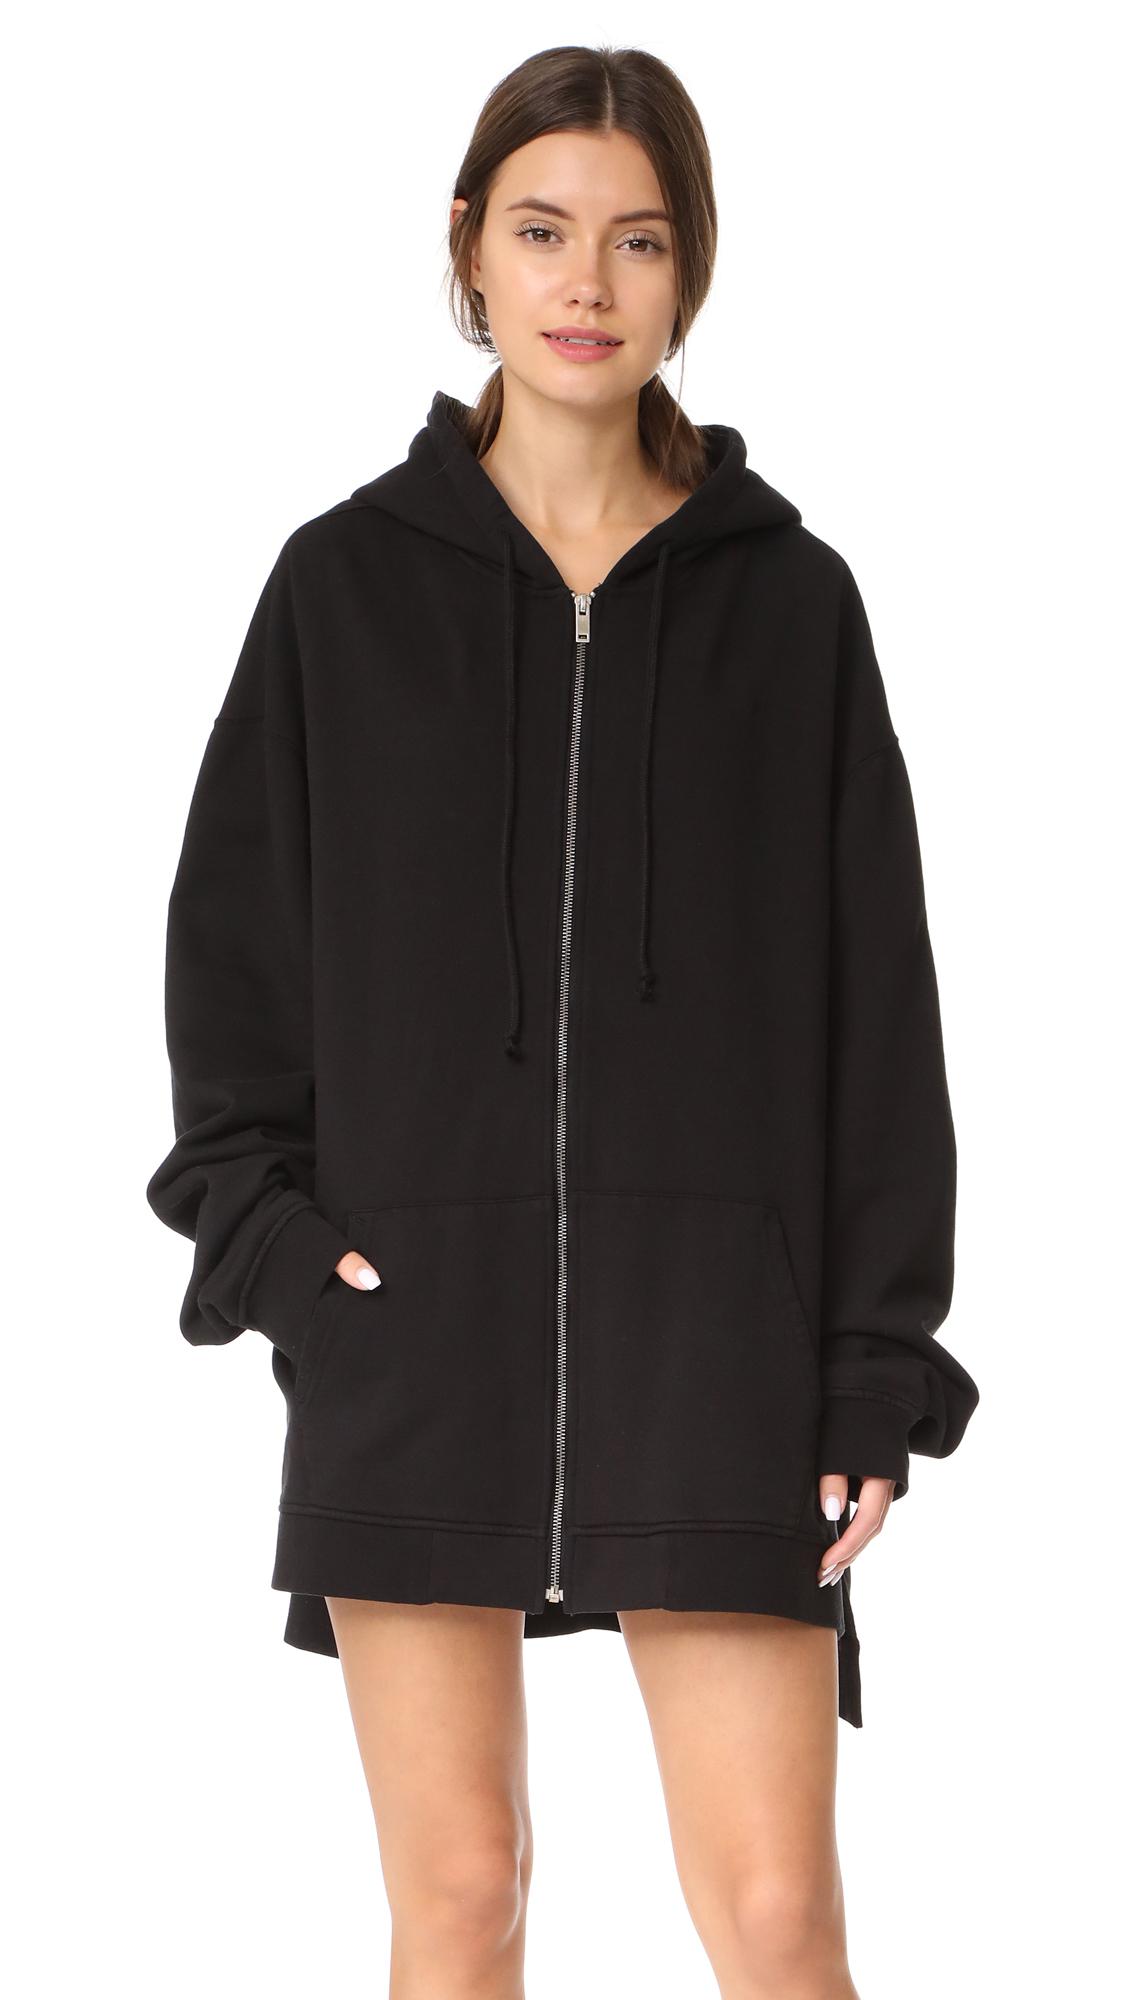 Oversized Zip Up Hoodies / Bohemian Chic Must-Have Items 2020 ...